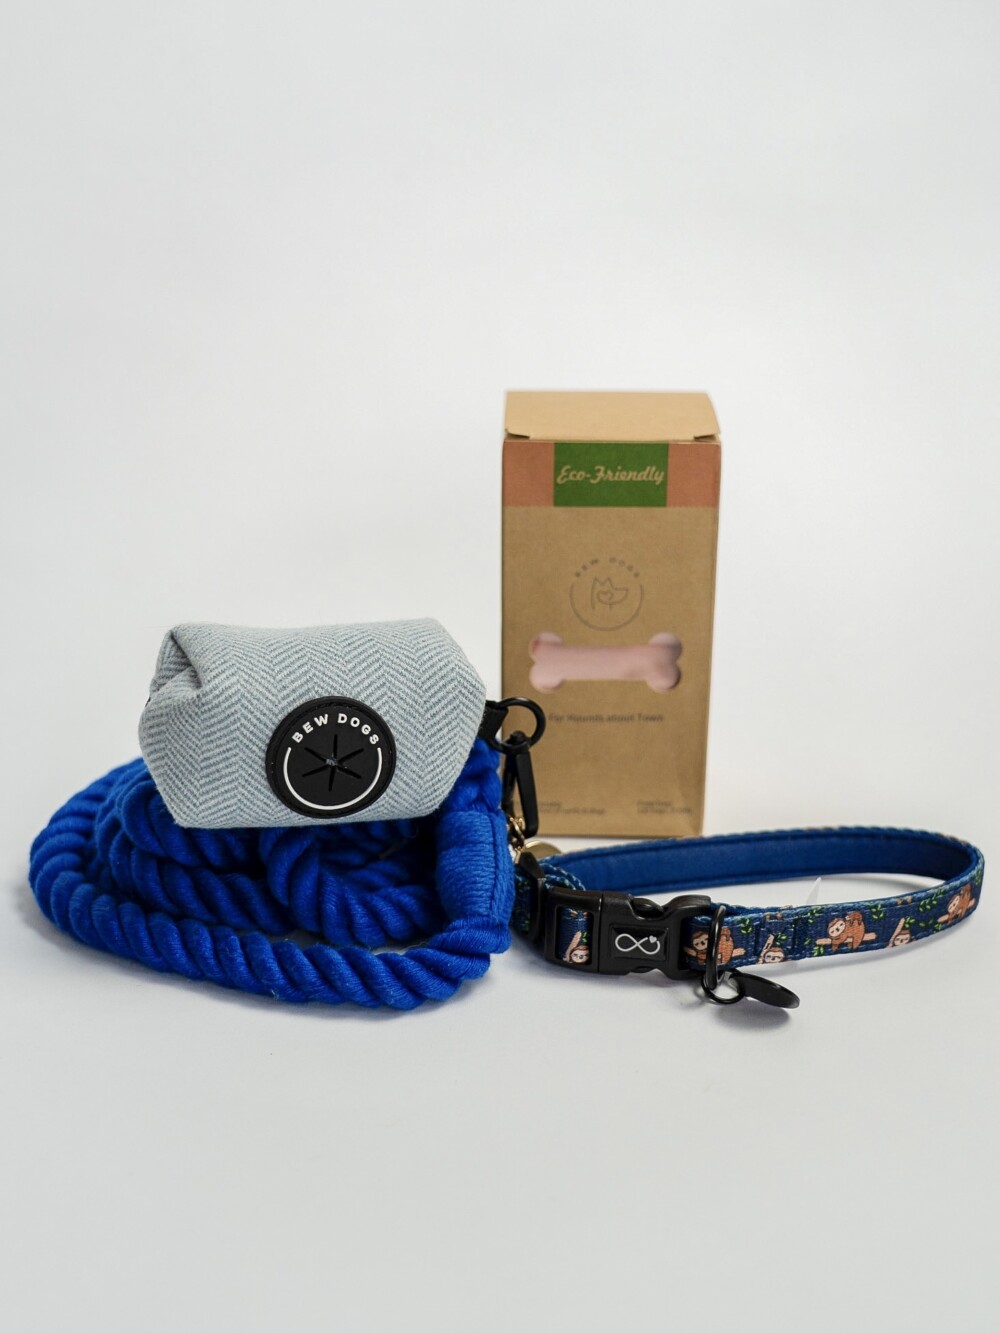 A bundle of products, including a deep blue rope lead, blue herringbone poop bag holder, a box of eco friendly poo bags and a blue collar, against a white background